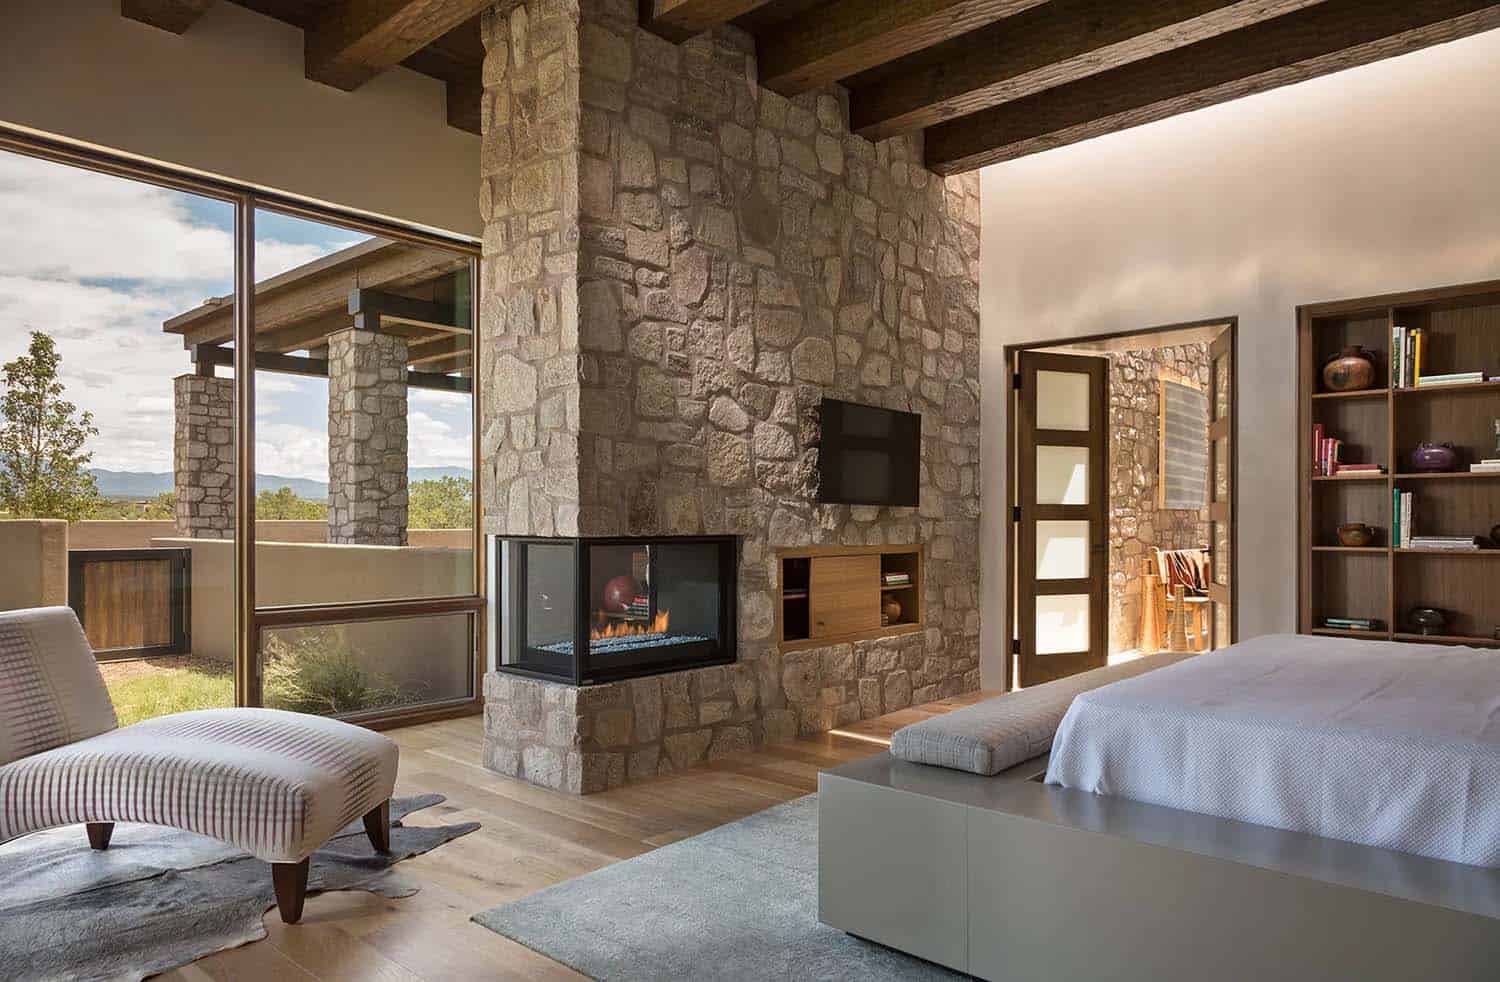 Santa Fe style bedroom with a fireplace